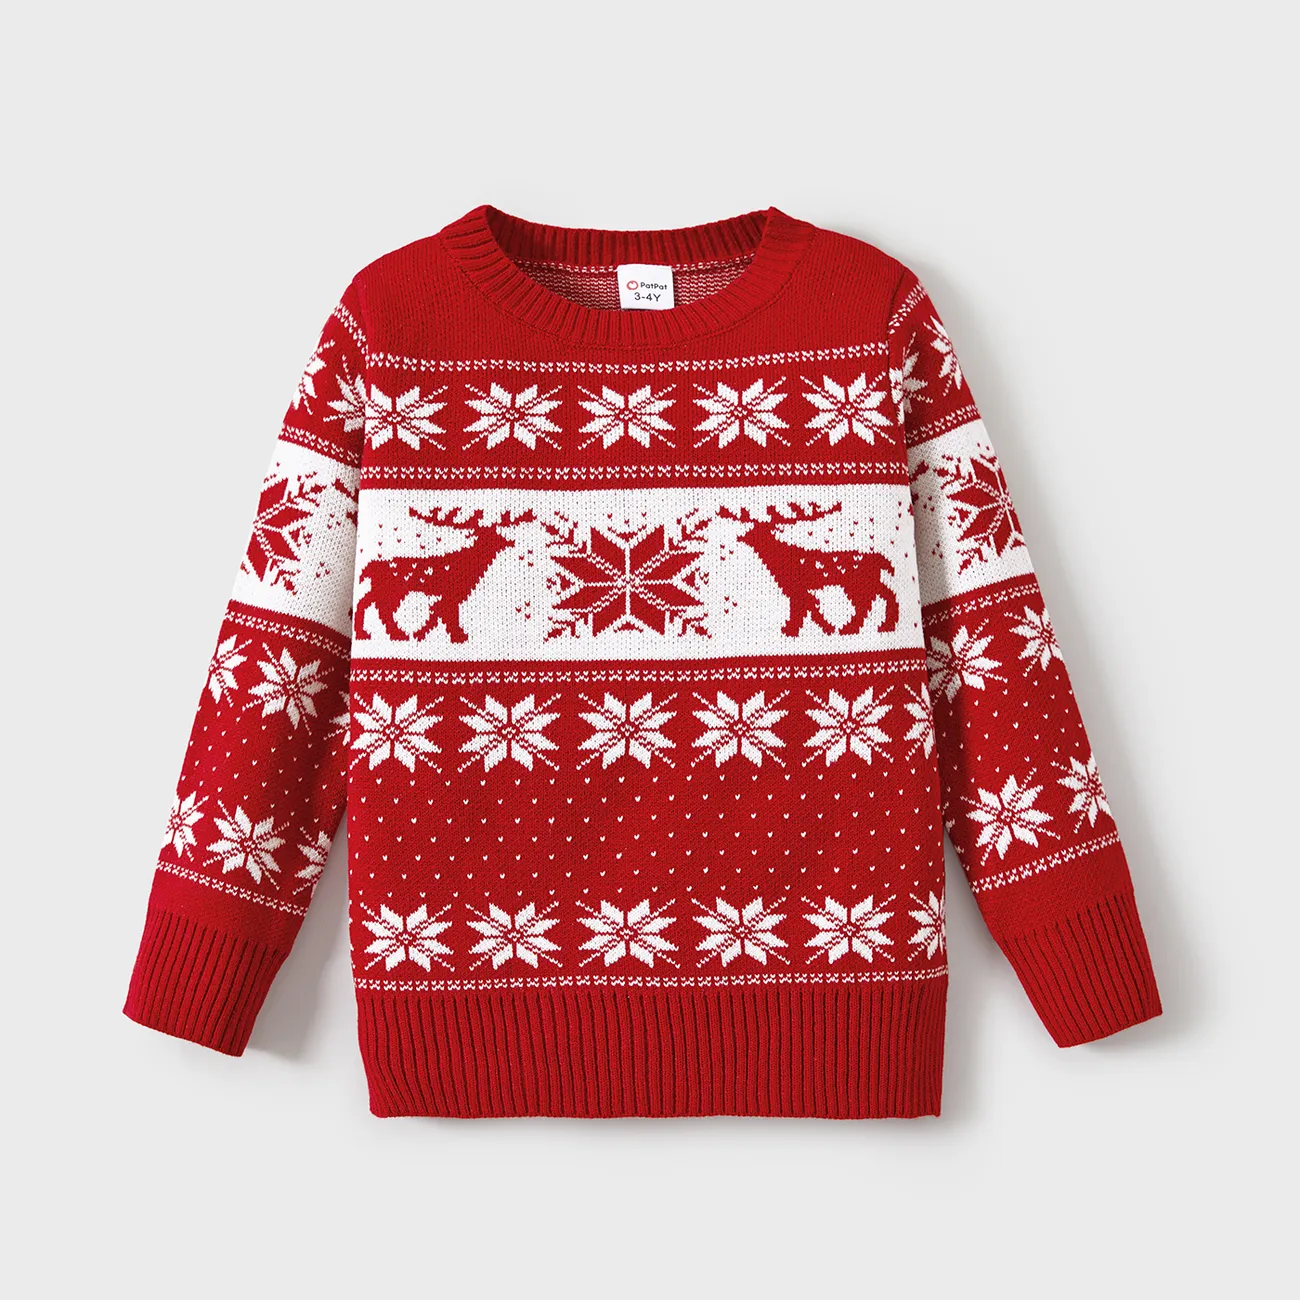 Christmas Family Matching Deer and Snowflake Graphic Long-sleeve Knitted Sweater Red big image 1